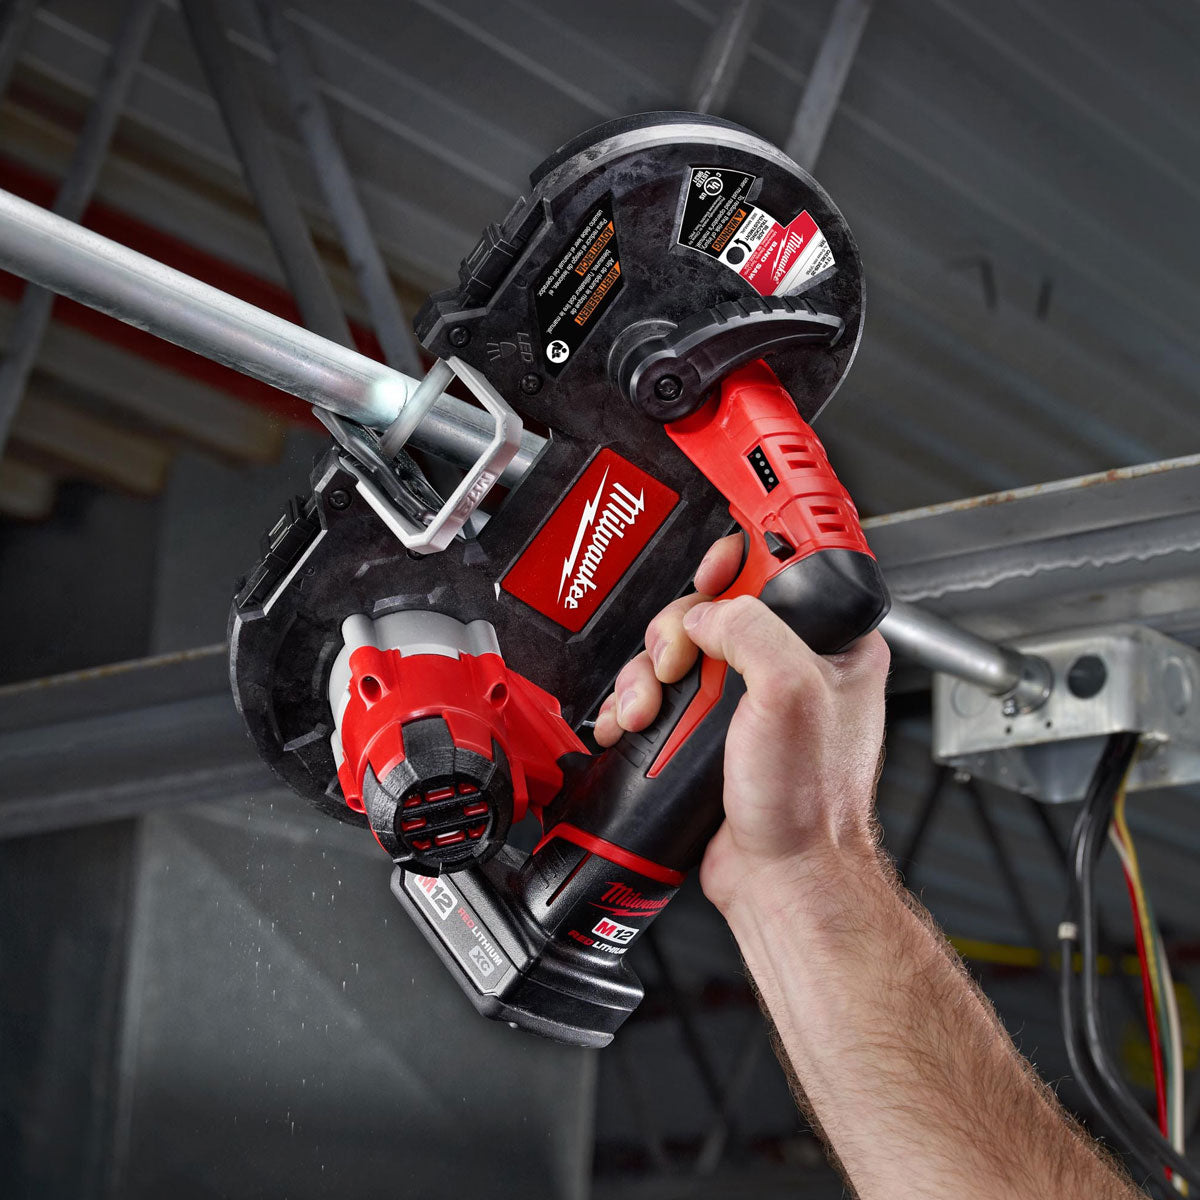 Milwaukee M12BS-0 12V Sub Compact Bandsaw with 1 x 4.0Ah Battery & Charger